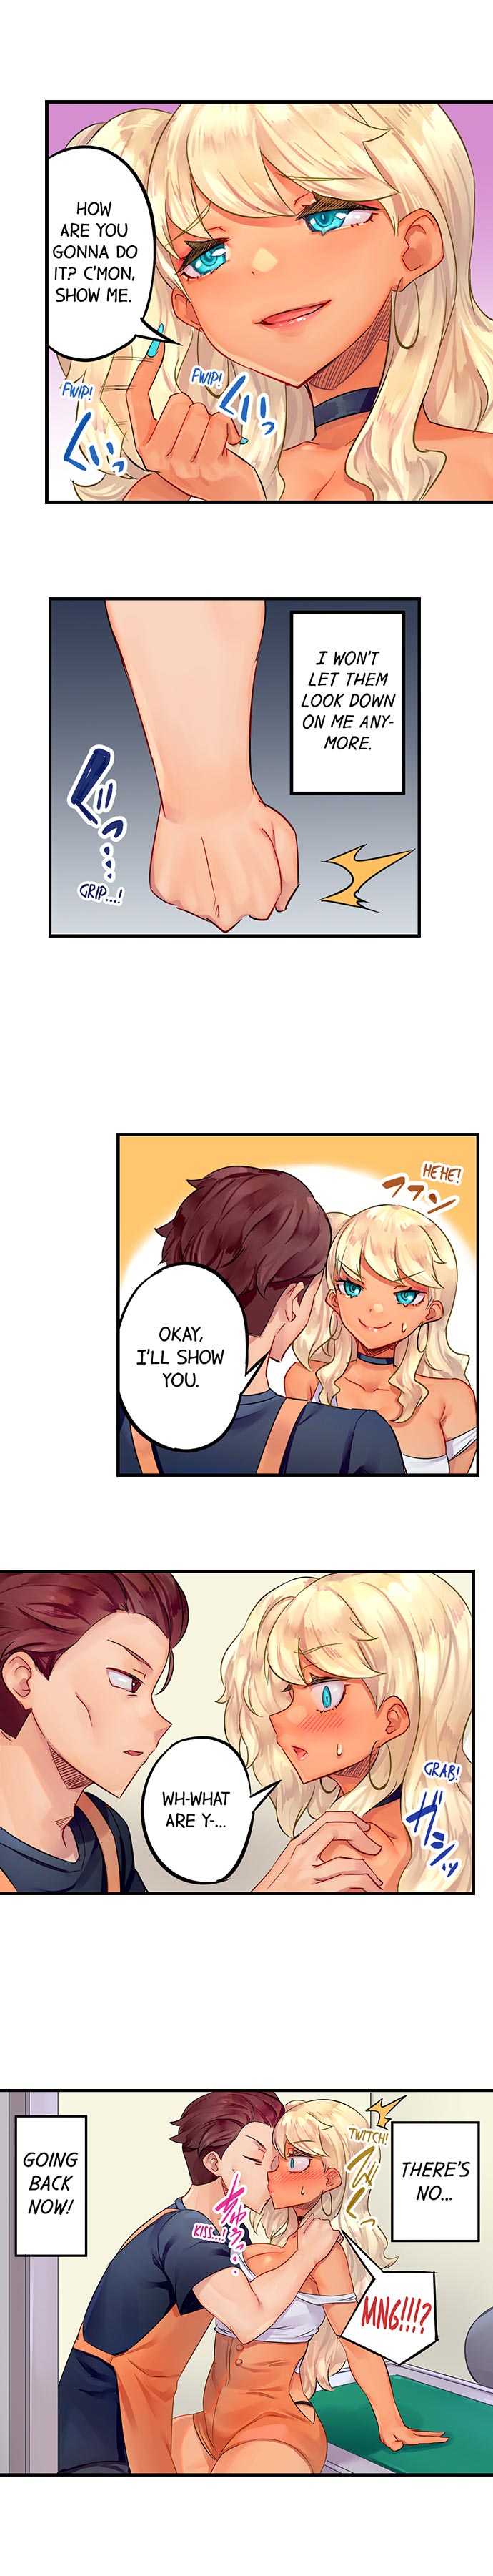 Orgasm Management for This Tanned Girl - Chapter 2 Page 4